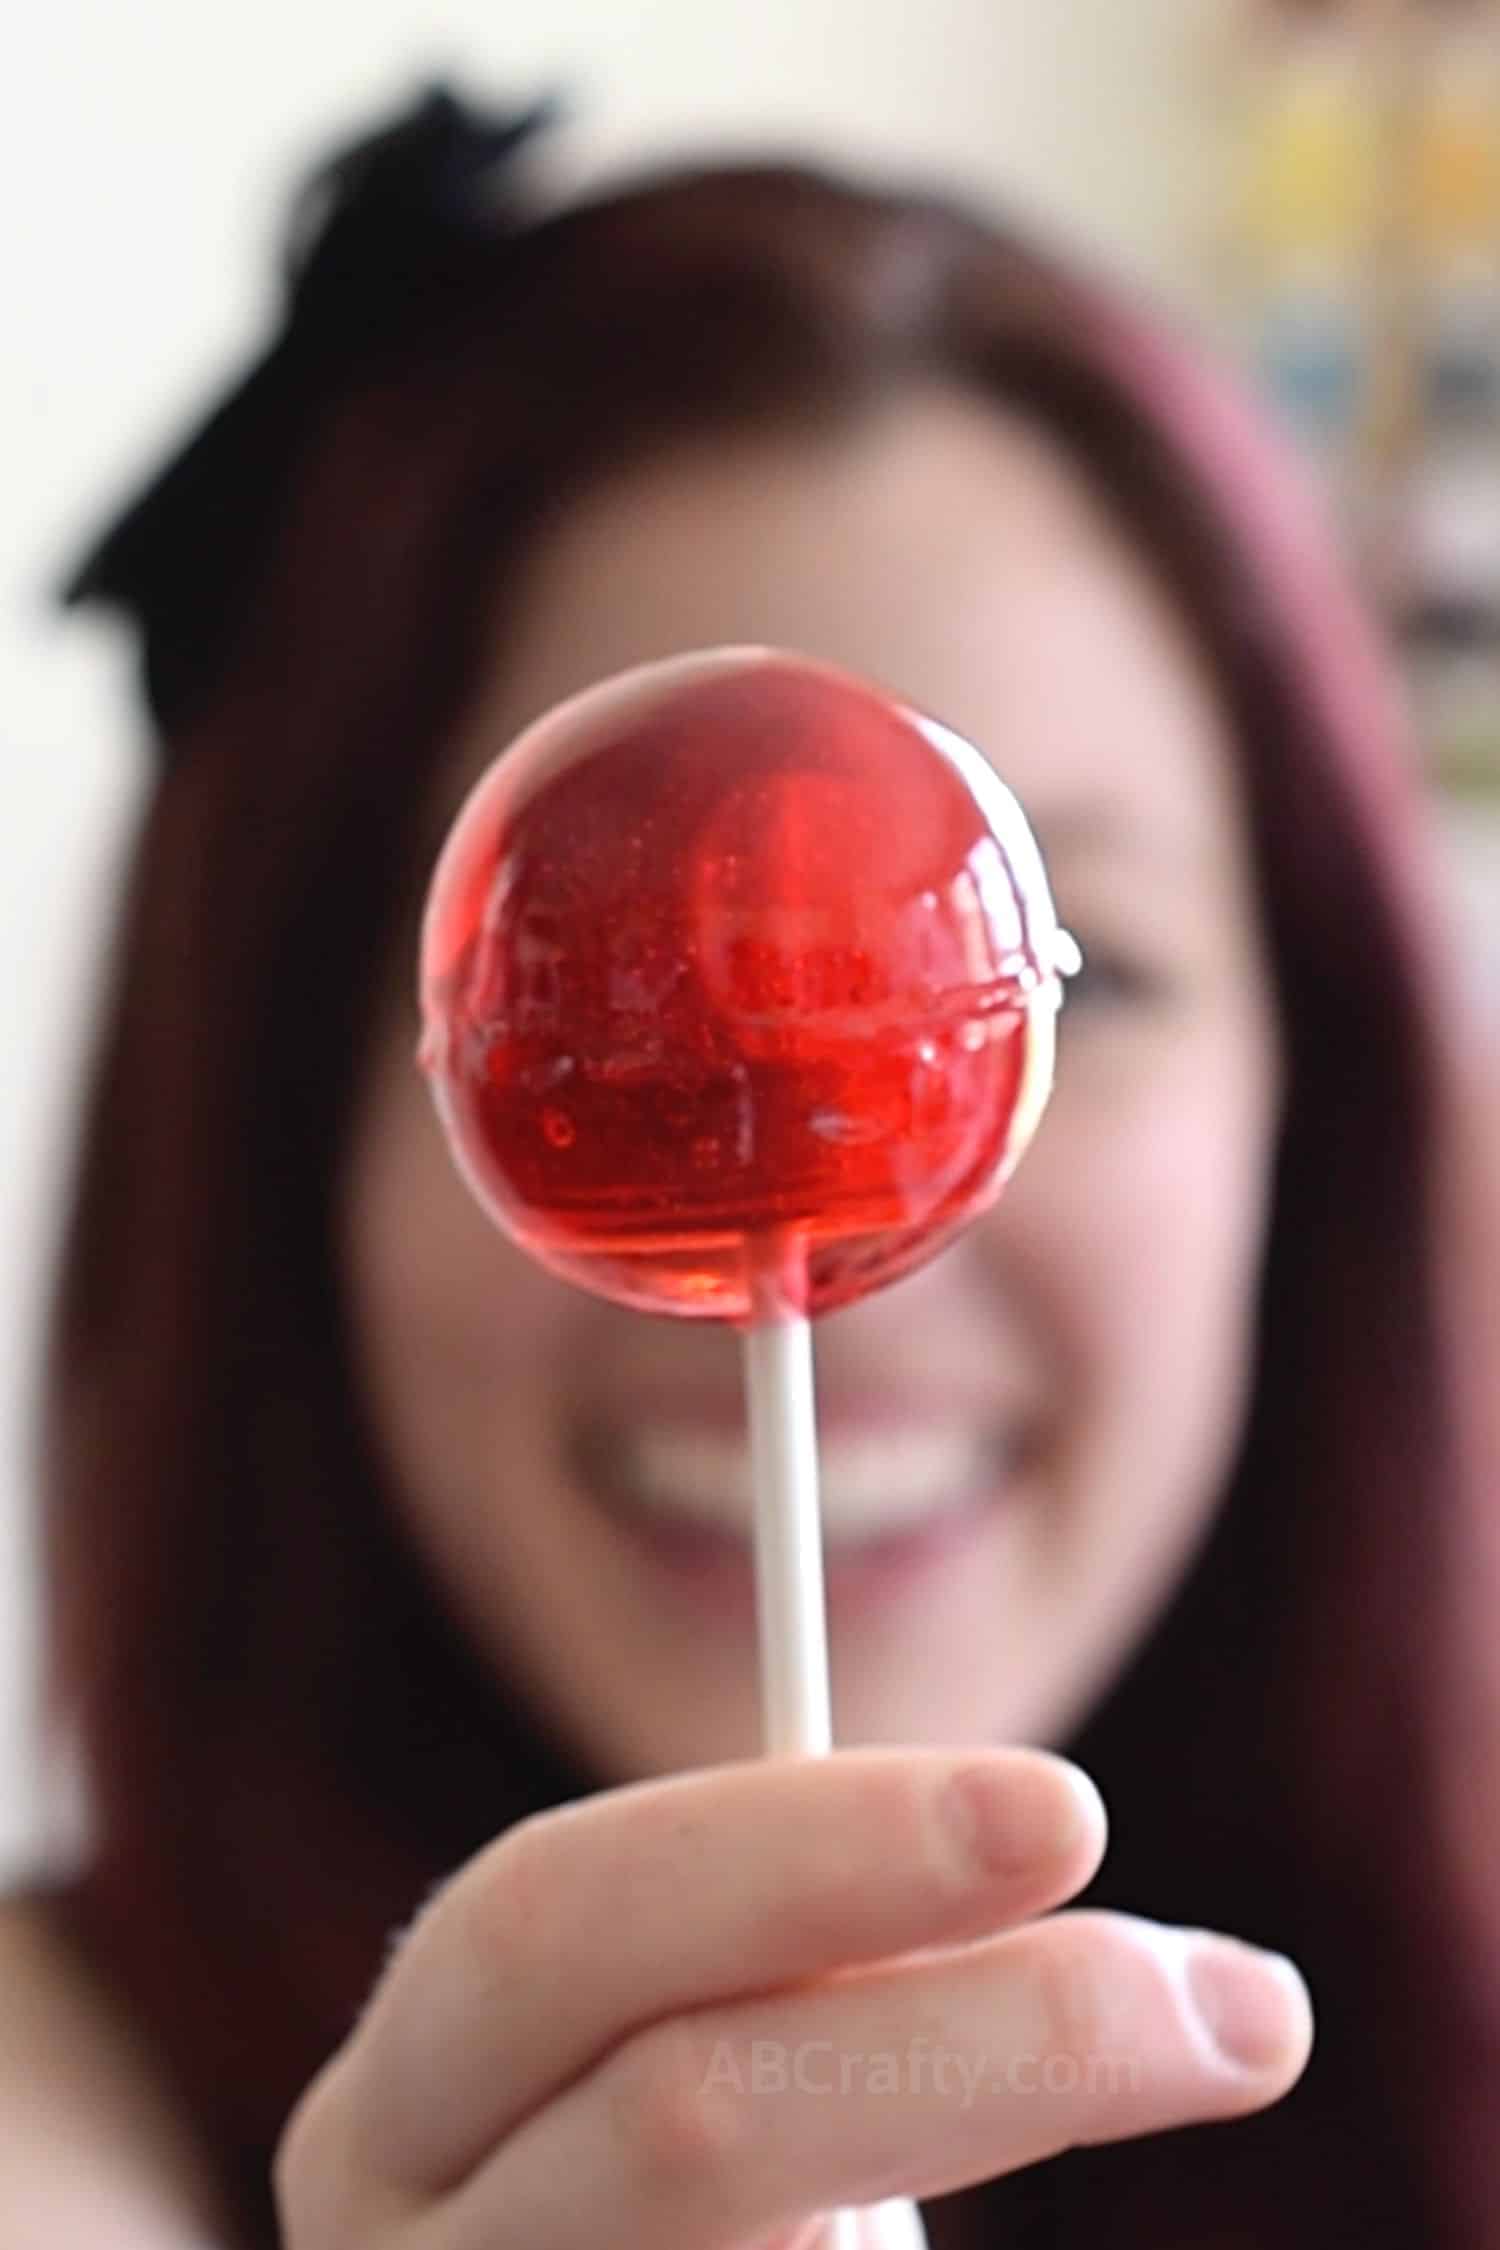 Homemade Giant Cherry Red Tootsie Pop - Red lollipop with a Tootsie Roll inside